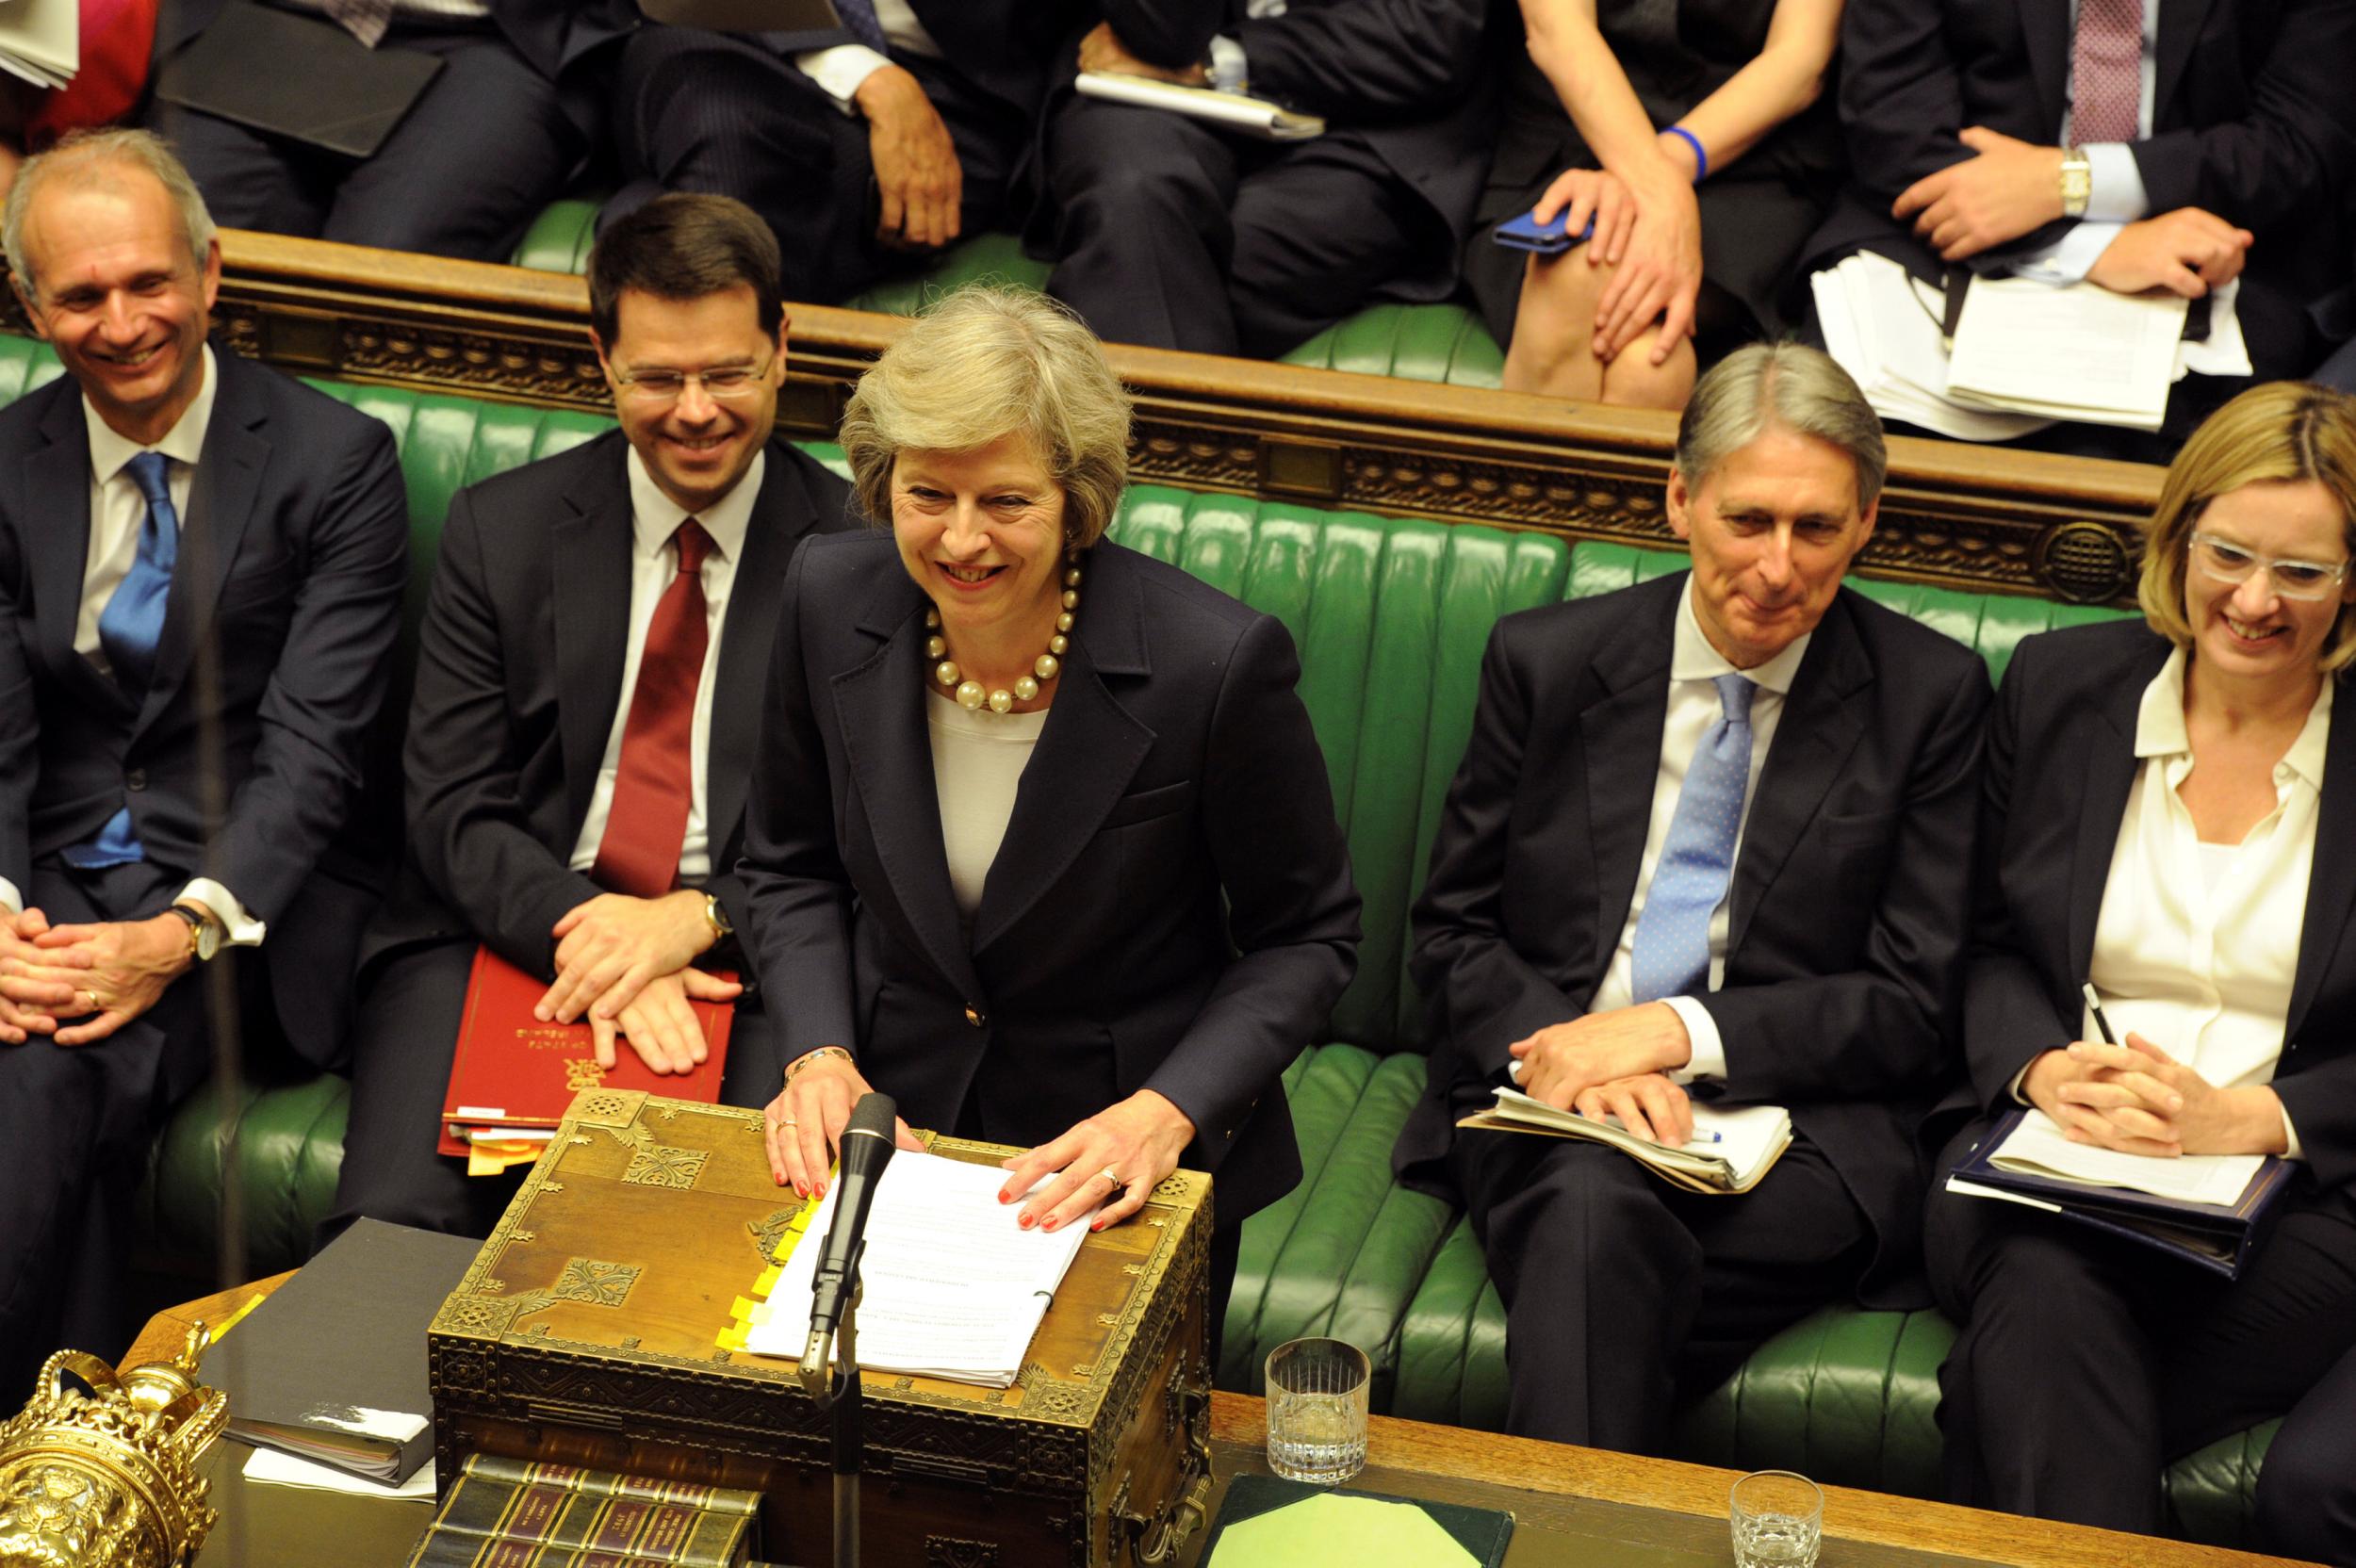 Theresa May addresses the House of Commons during her first Prime Minister's Questions